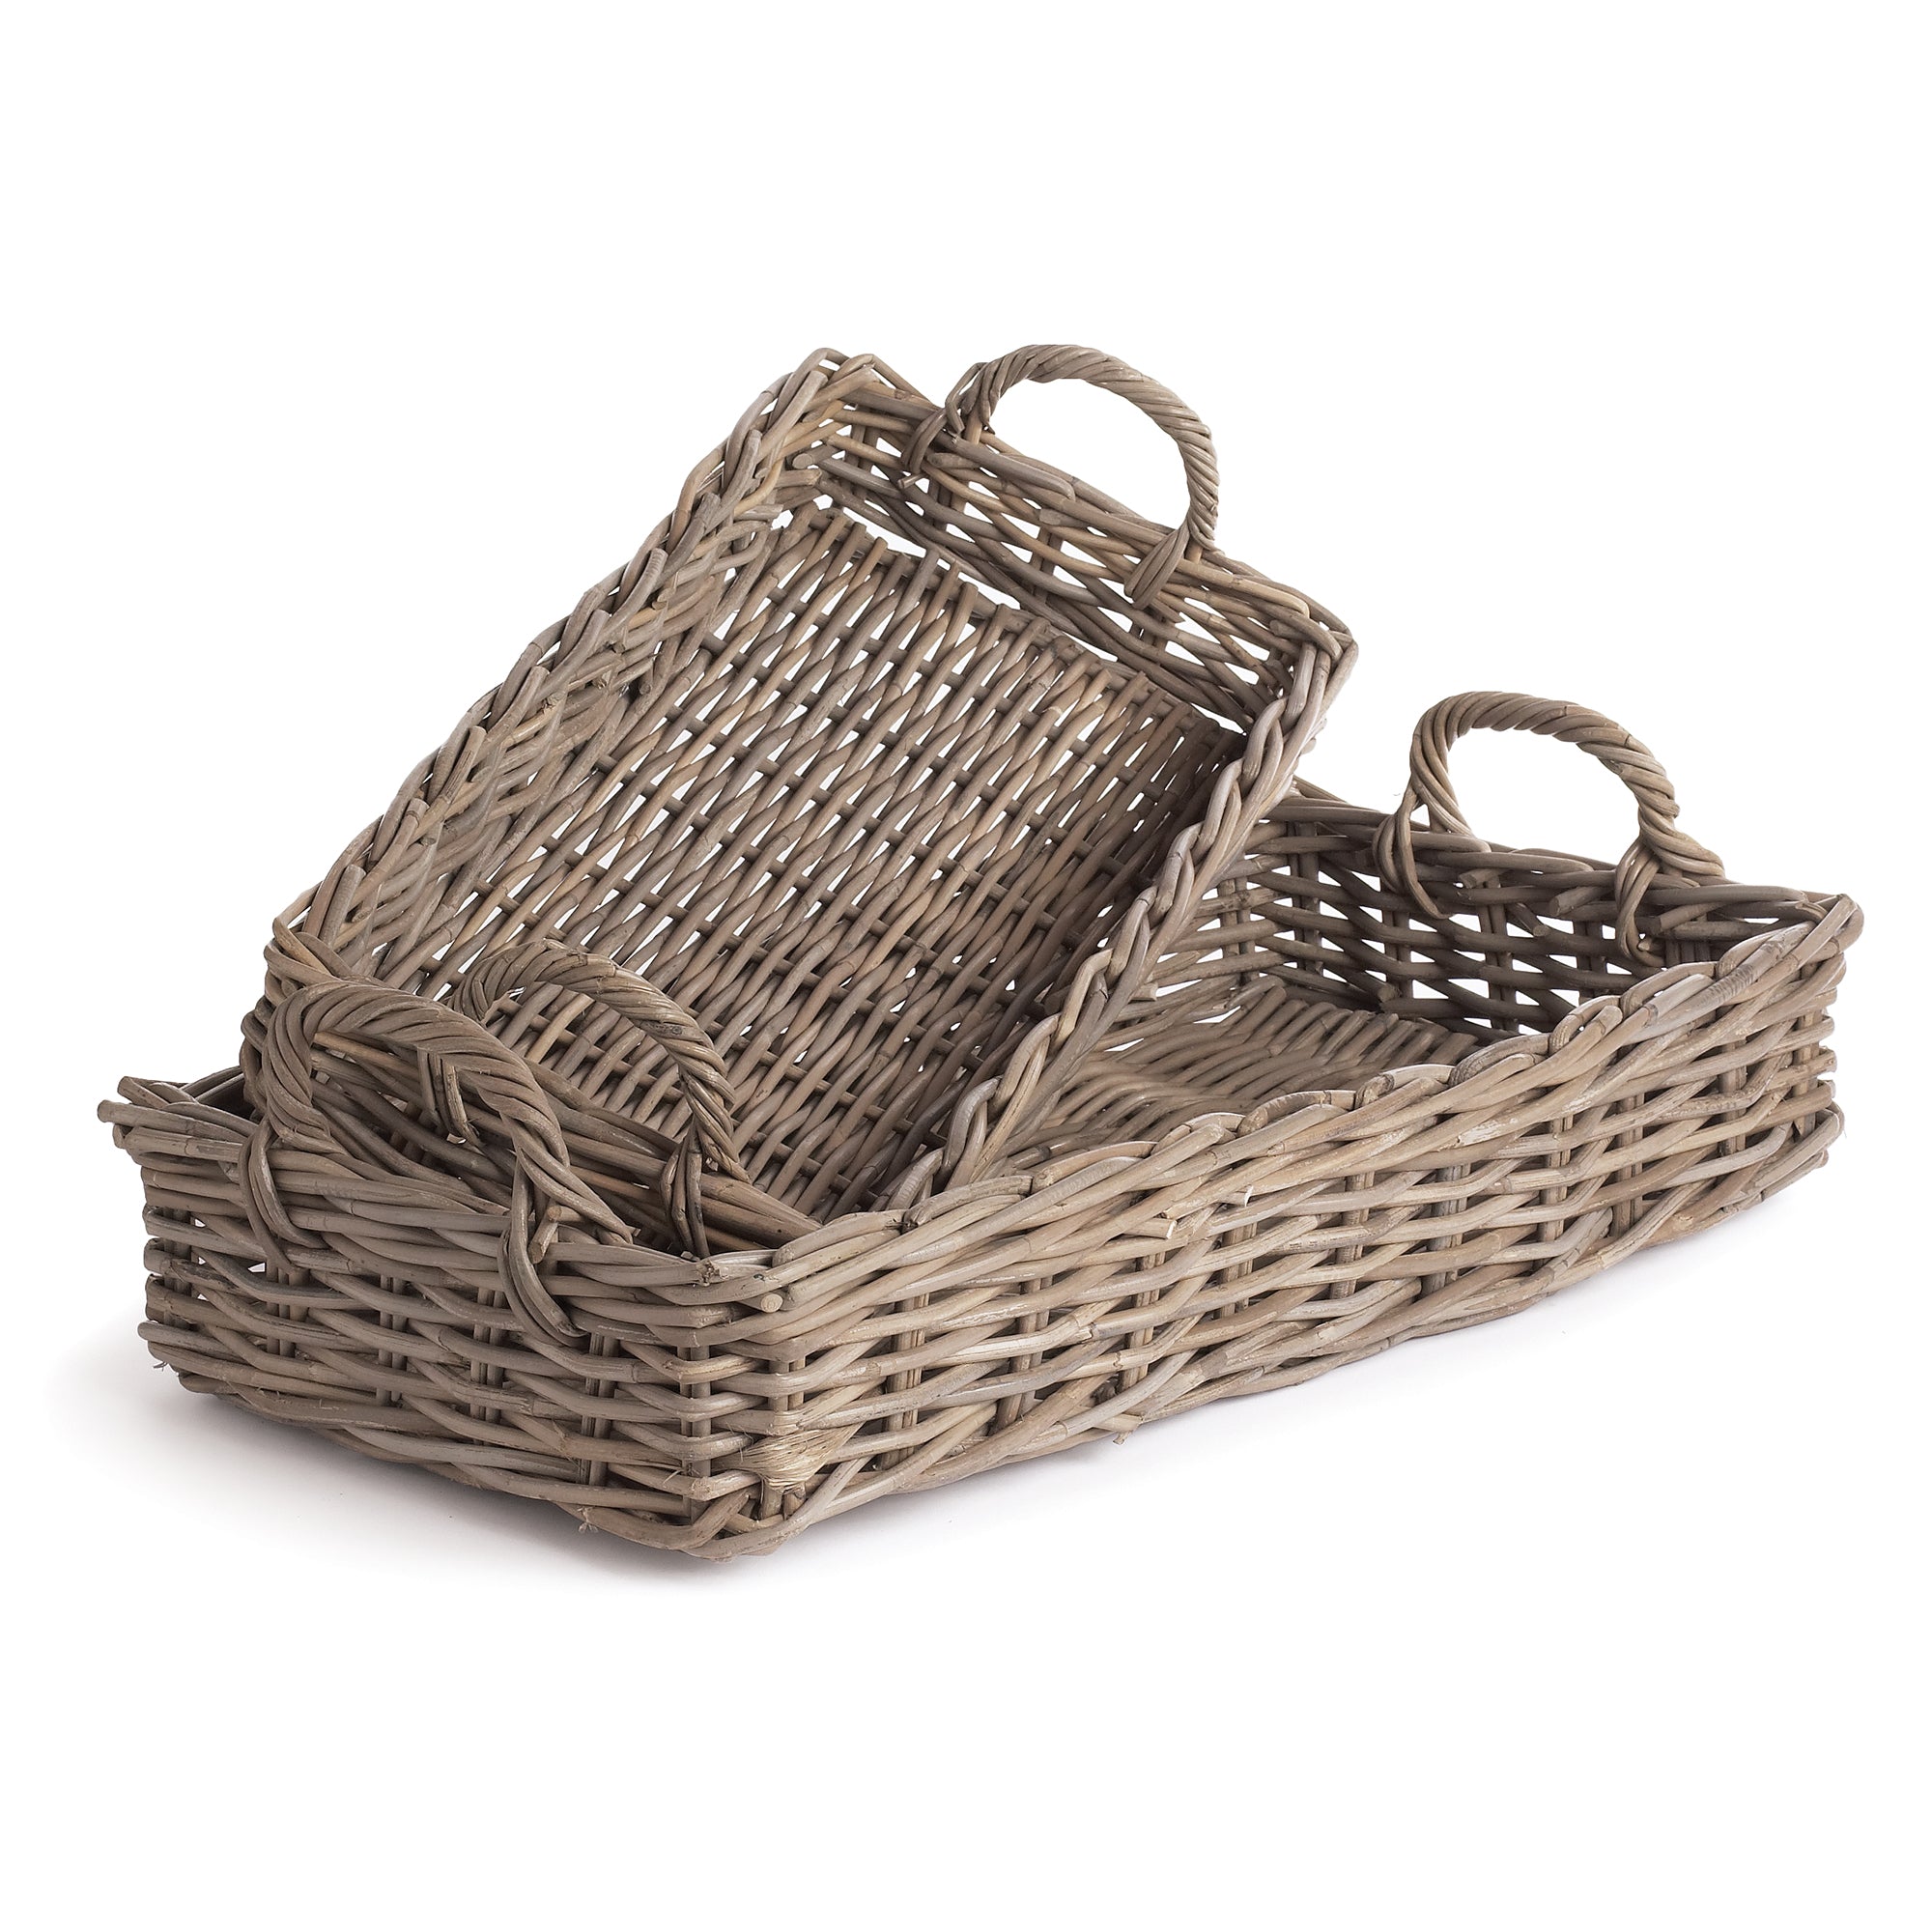 When it comes to the classic, casual appeal of rattan, these baskets are some of the best. The low, wide design makes them ideal for entertaining or as a tray for the ottoman. Amethyst Home provides interior design, new construction, custom furniture, and area rugs in the Laguna Beach metro area.